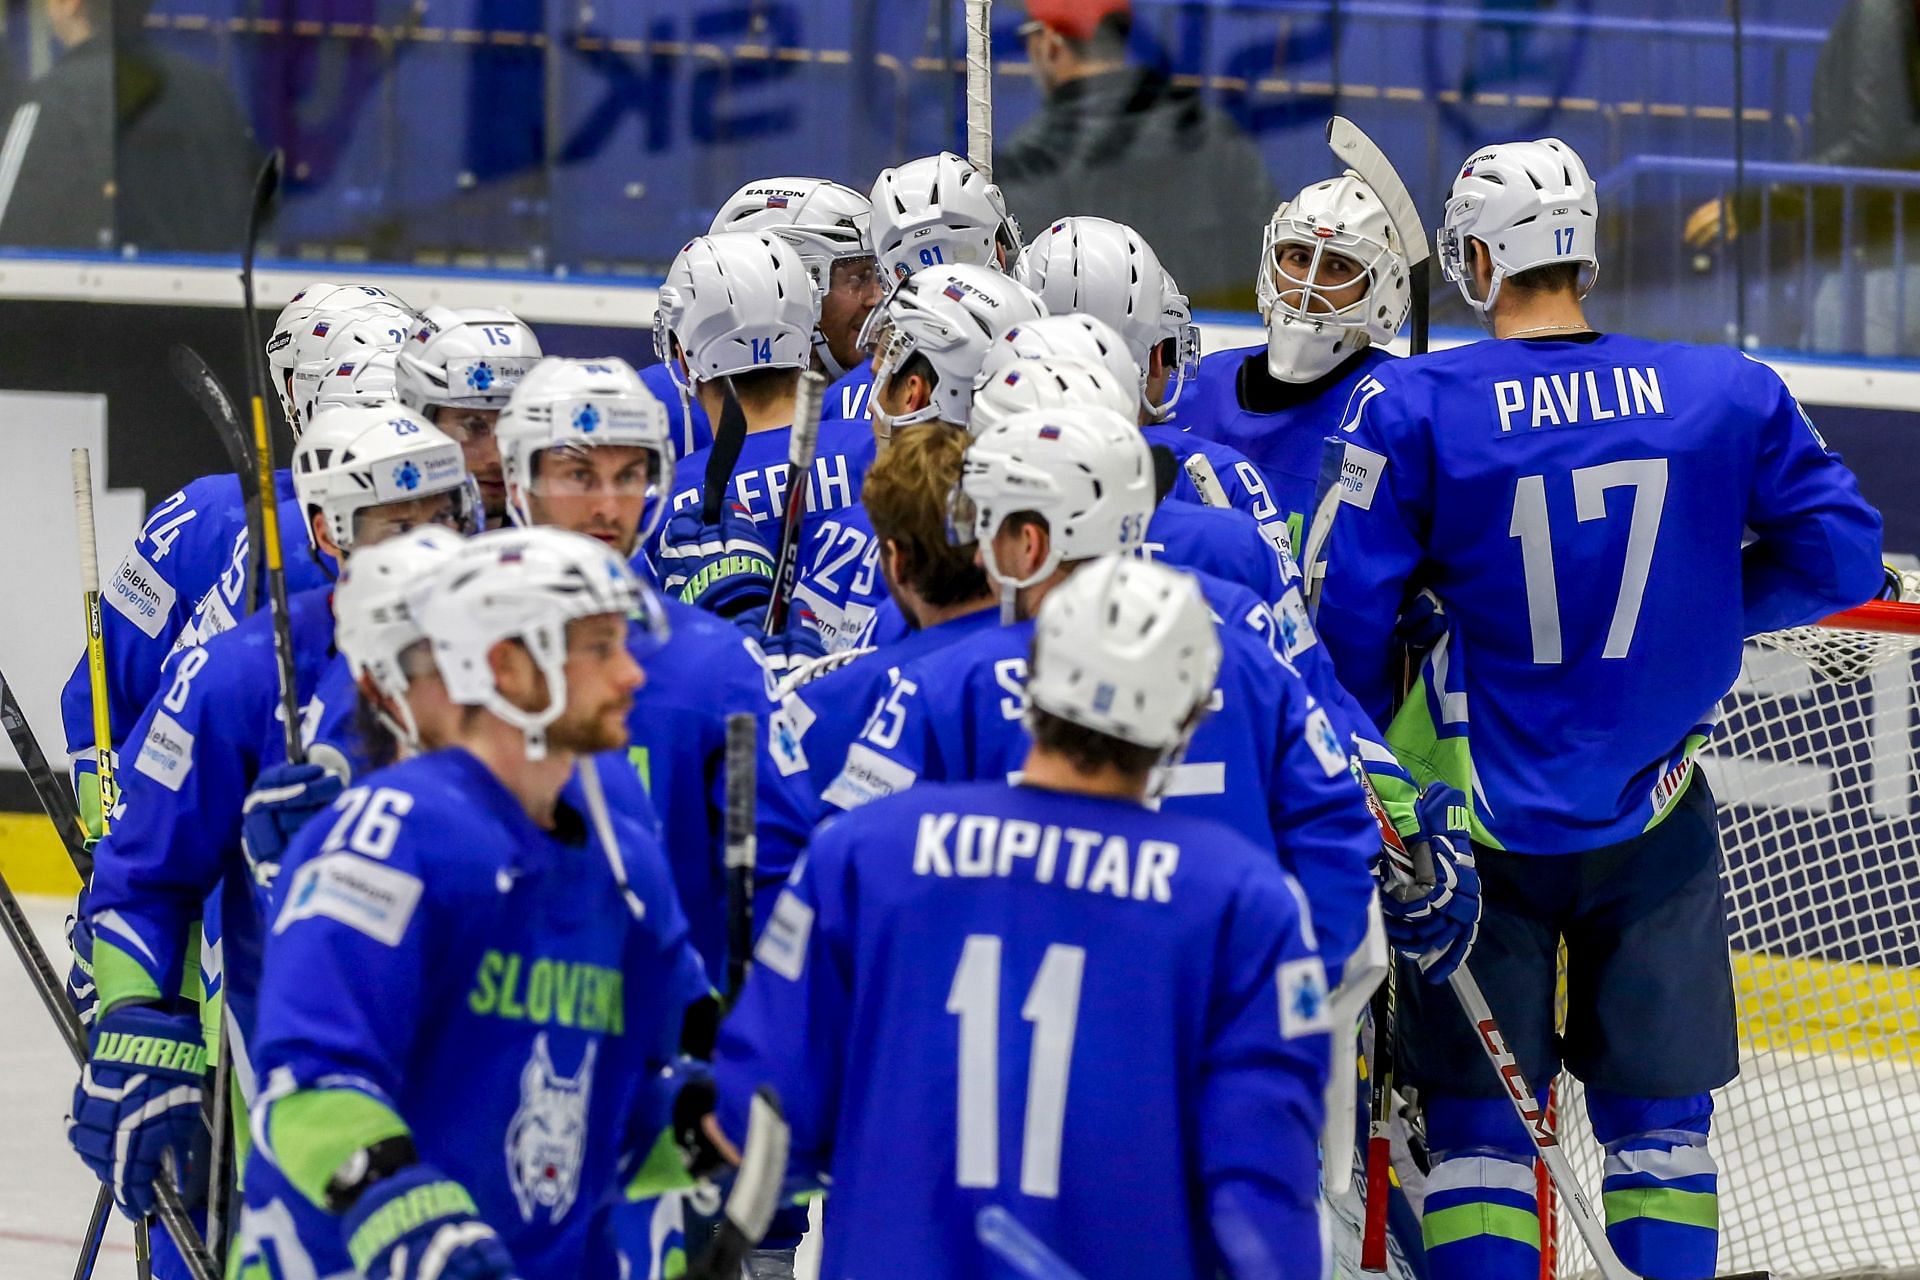 Czech Republic vs Slovenia Group B How to watch, live streaming, channel list and more